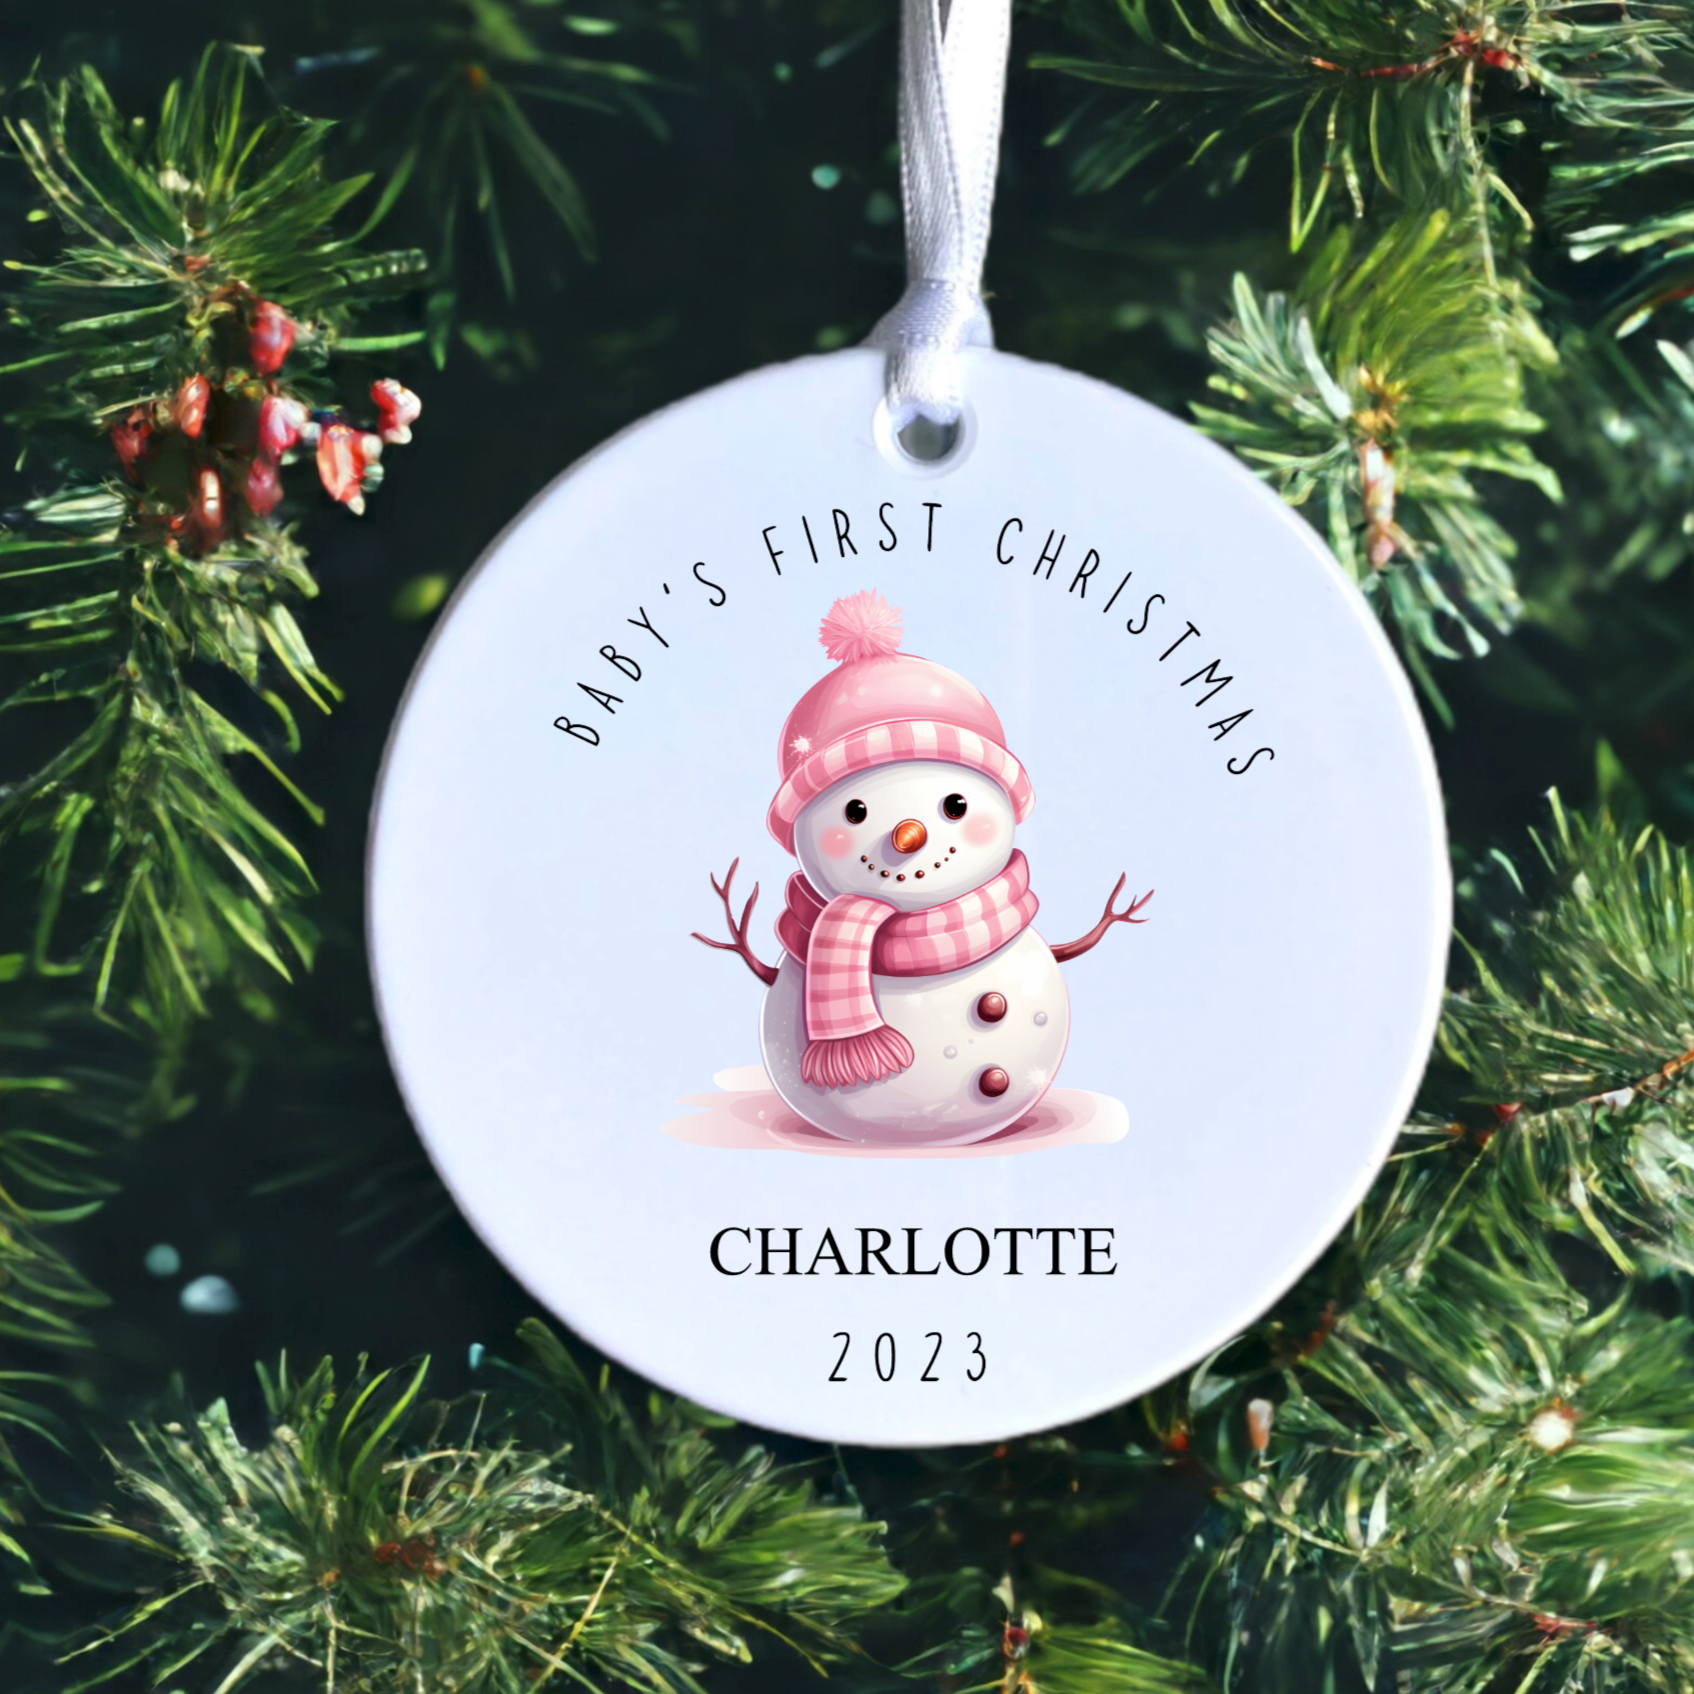 Baby's first Christmas - pink snowman, ceramic bauble